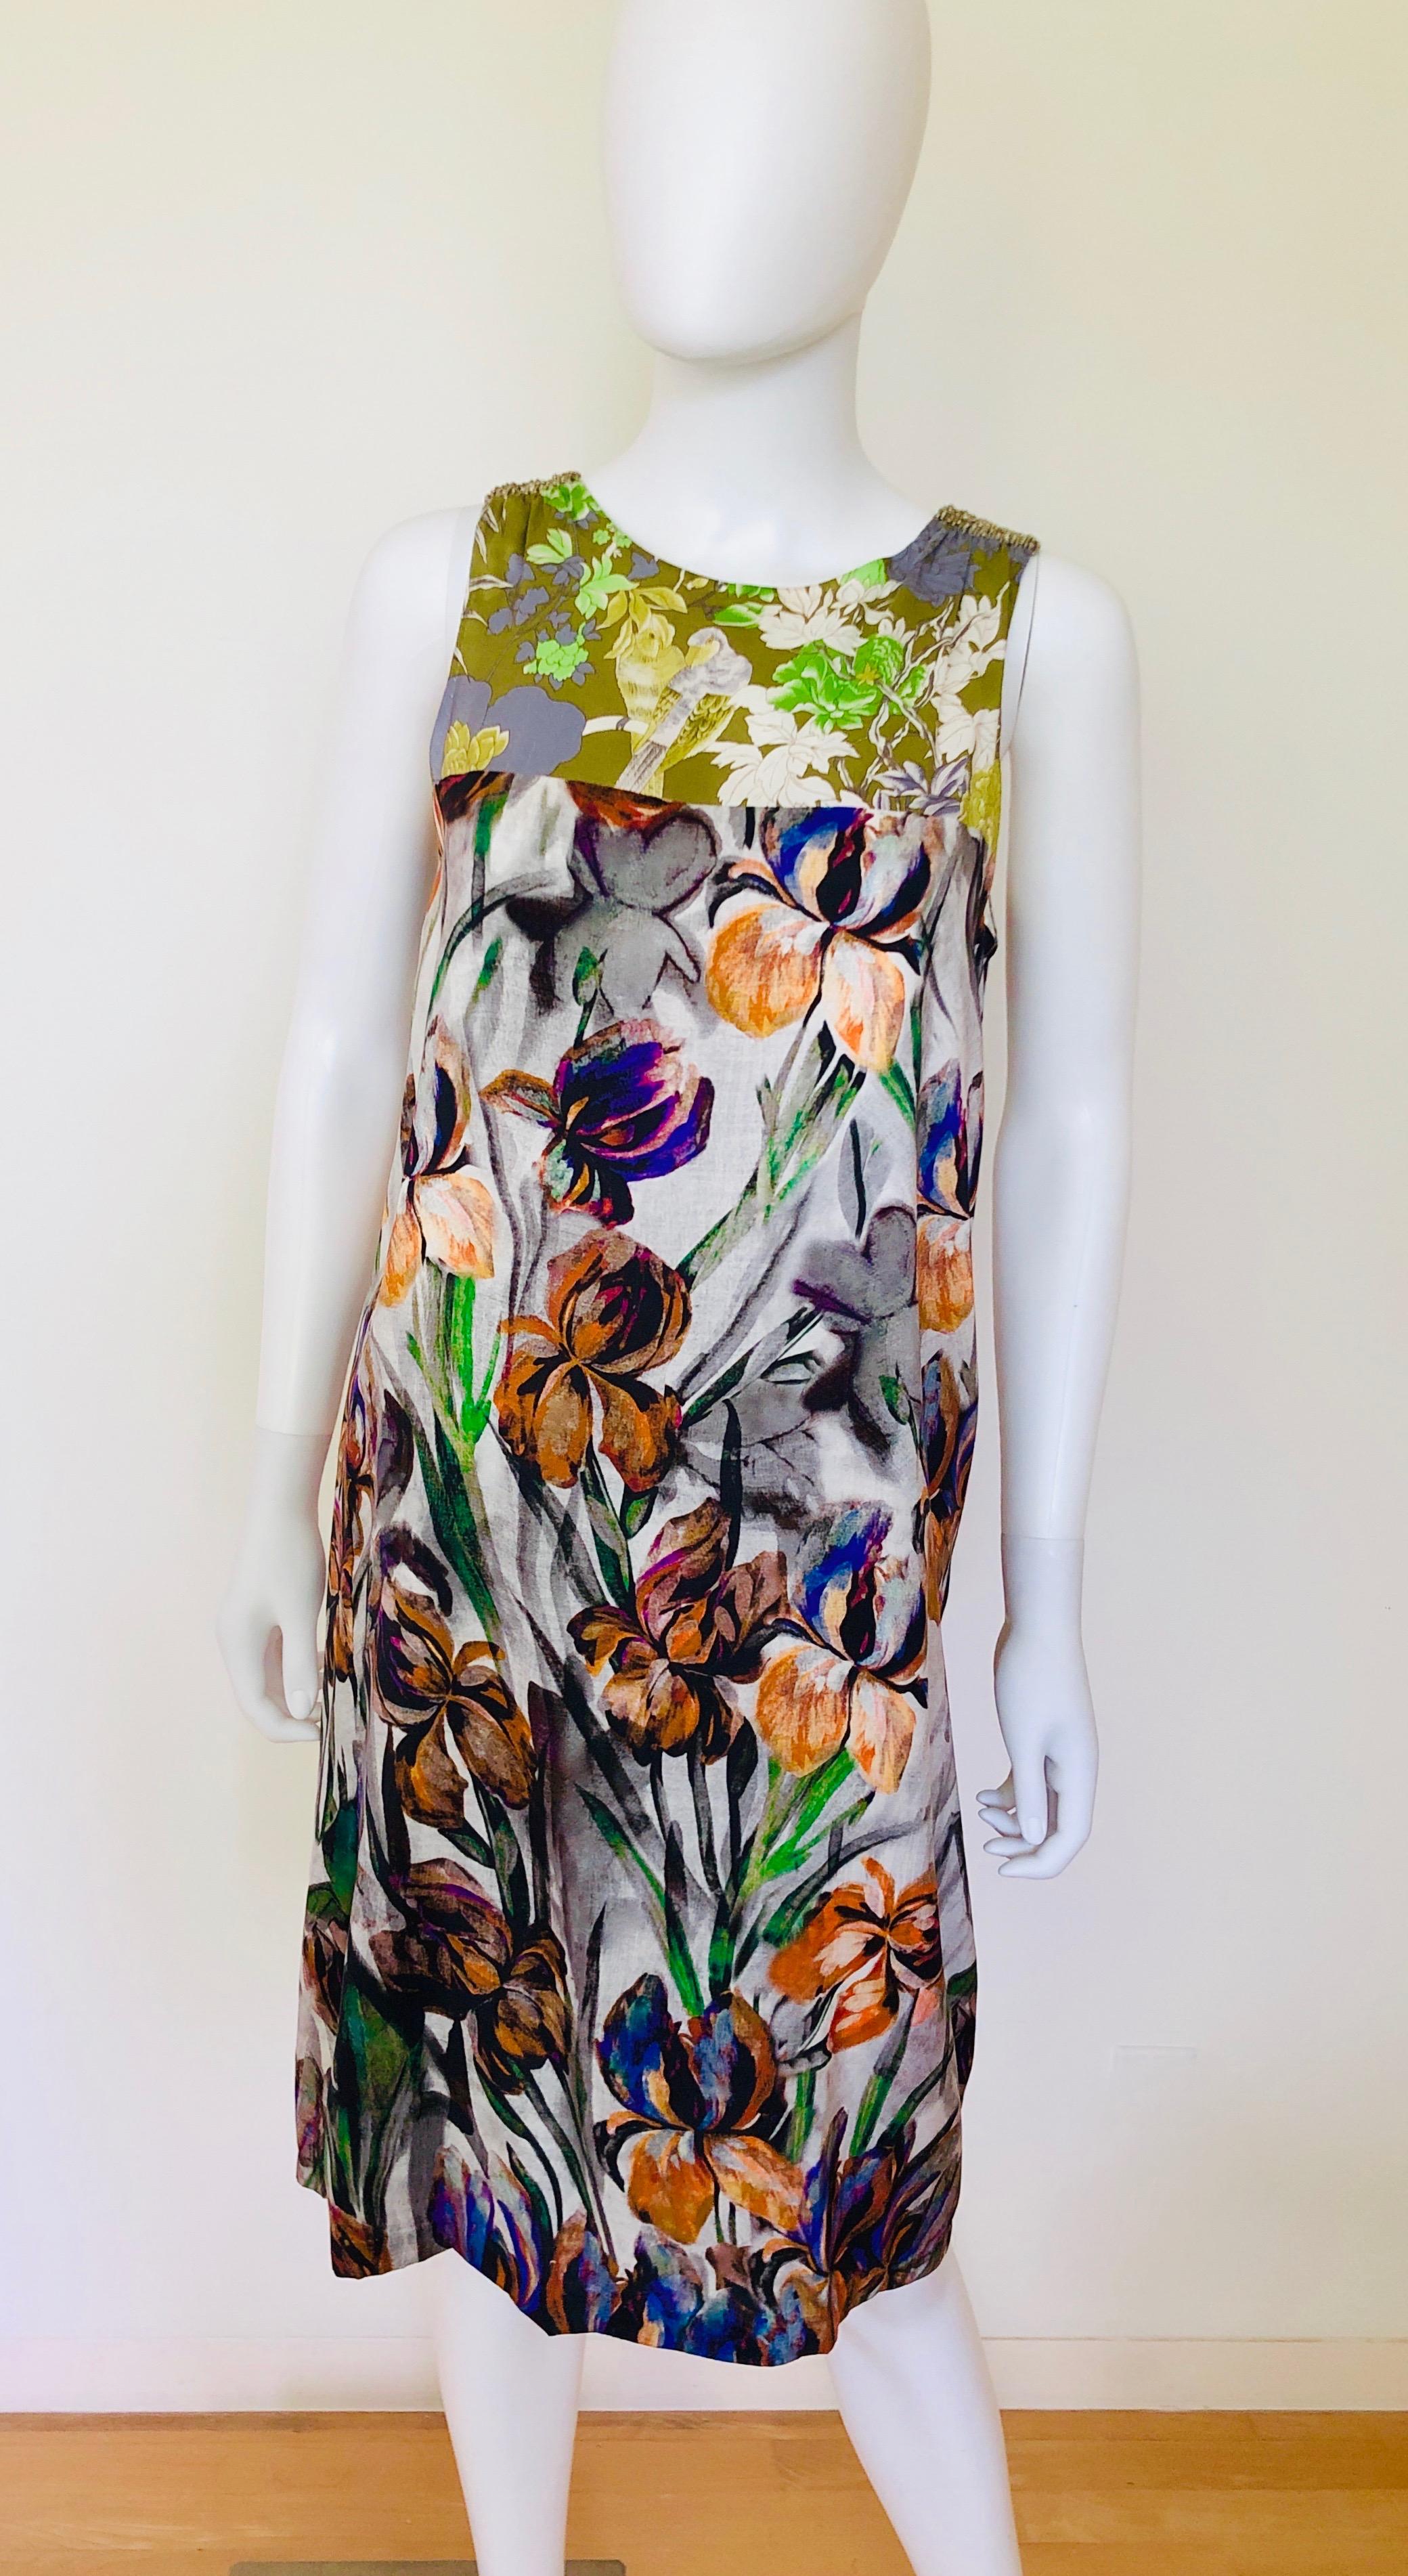 Offered is a signed Dries van Noten multicolored (green, blue, purple, orange, gray, black & white) floral pattern on tropical bird pattern sleeveless sheath day into evening dress with shoulder embellishments.  
Dries Van Noten / French size